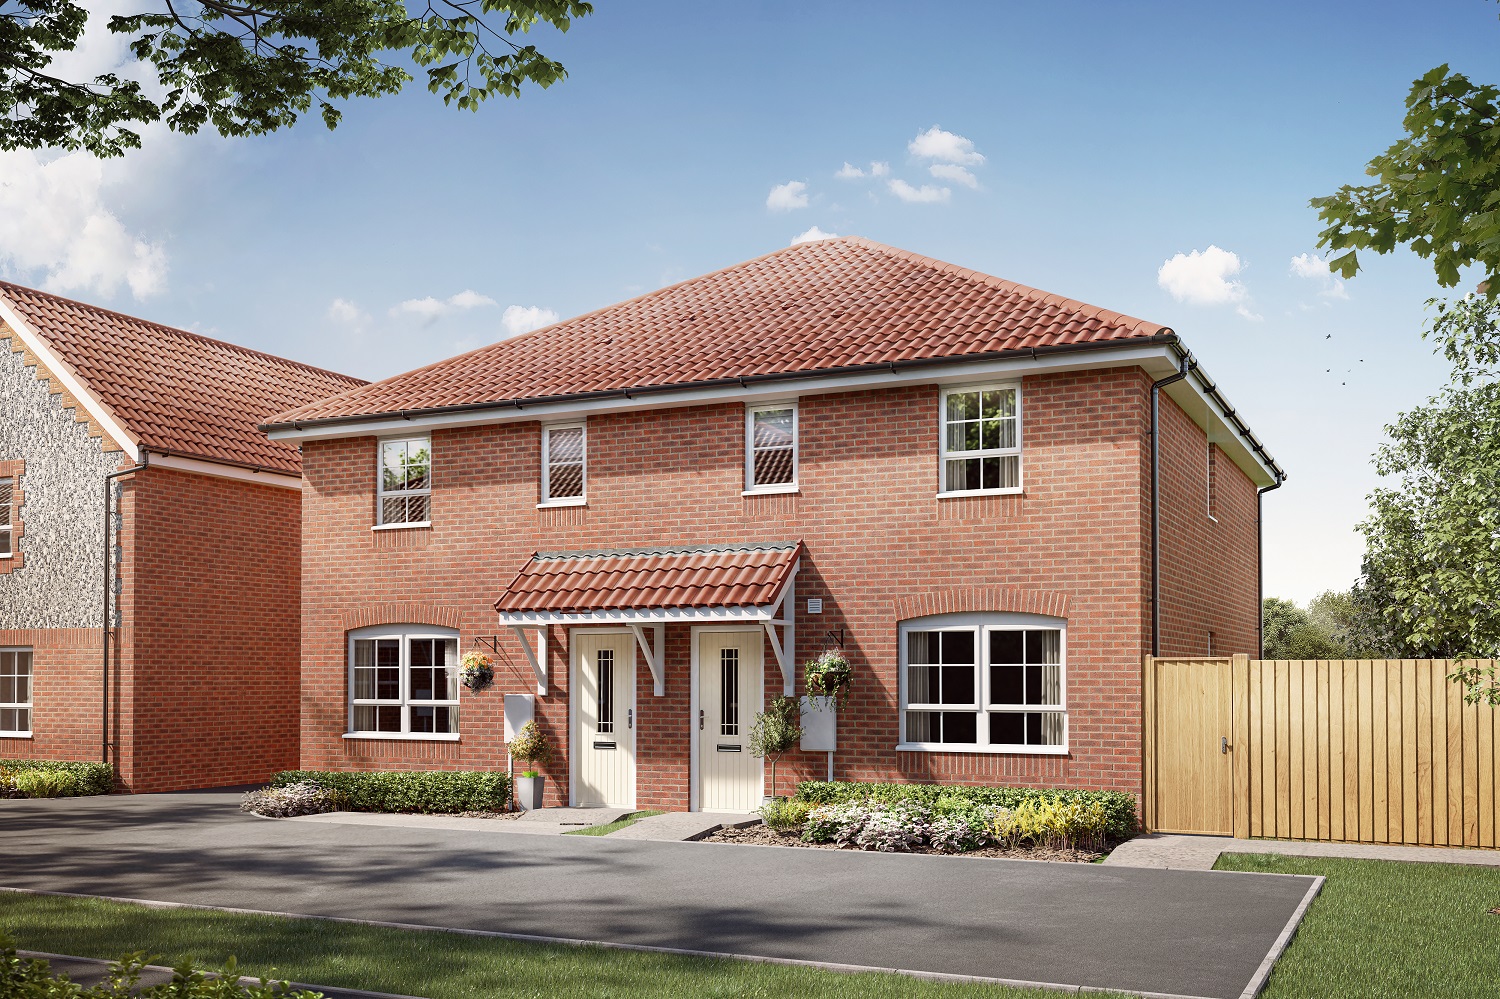 Property 1 of 9. CGI Of The External View Of The Matlock At Ceres Rise